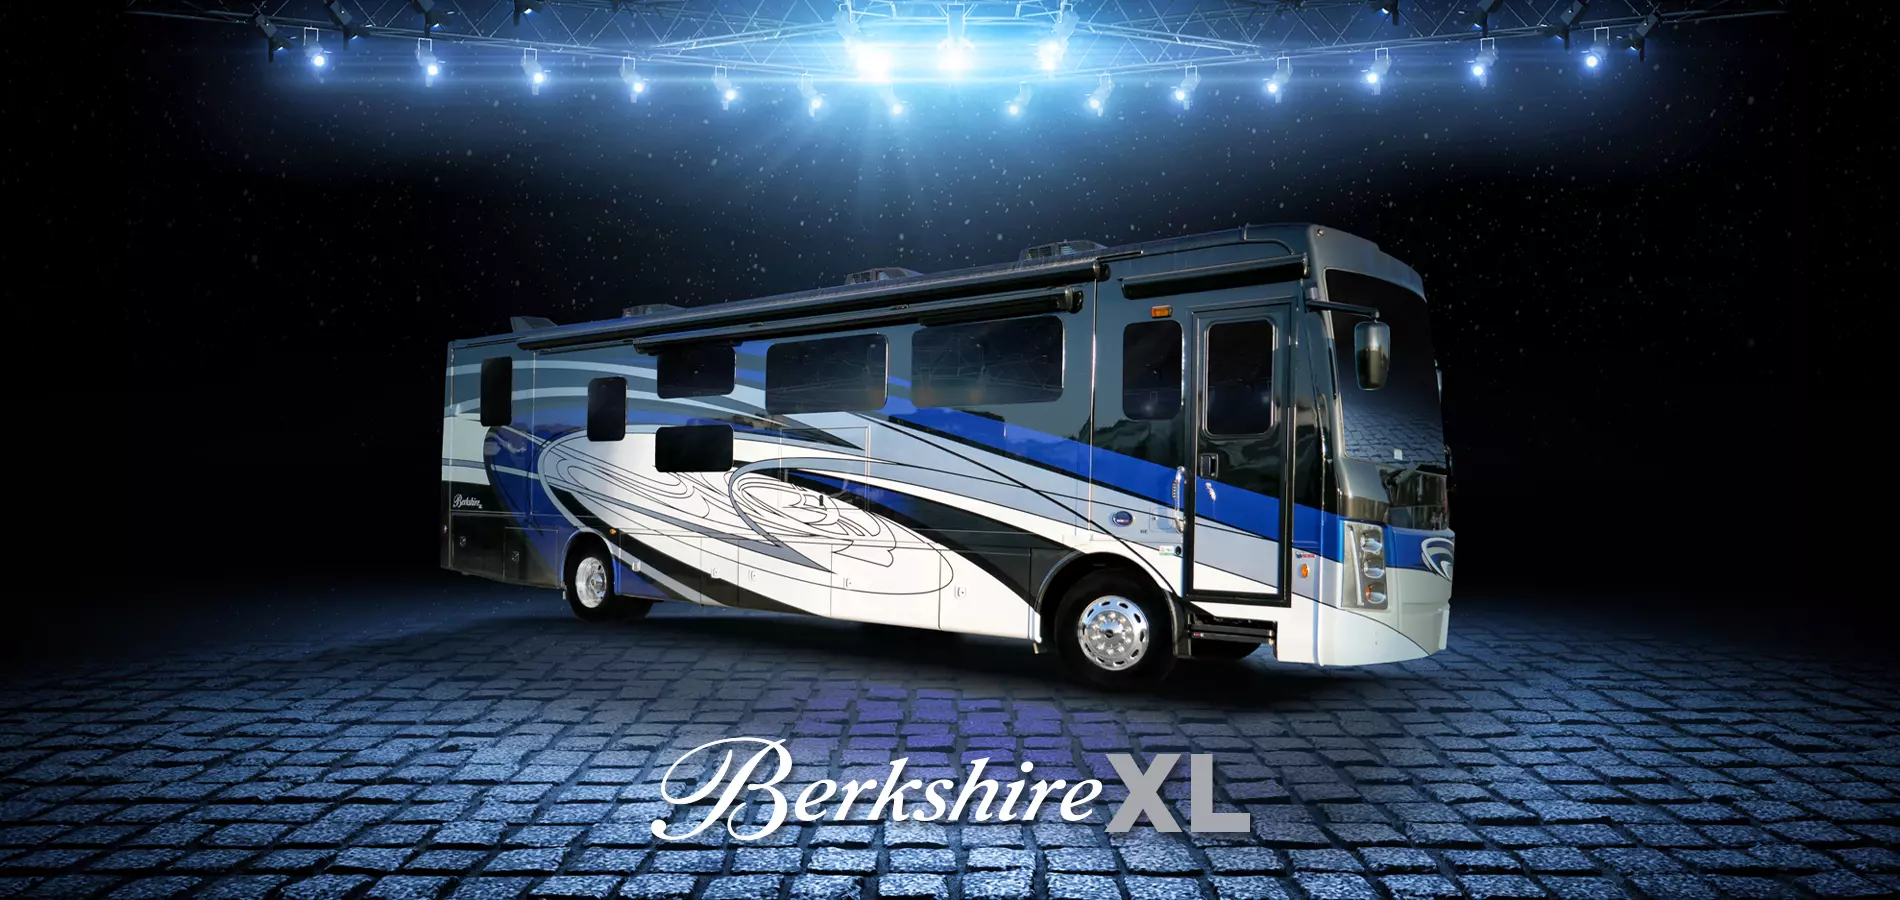 Berkshire Xl Forest River Rv Manufacturer Of Travel Trailers